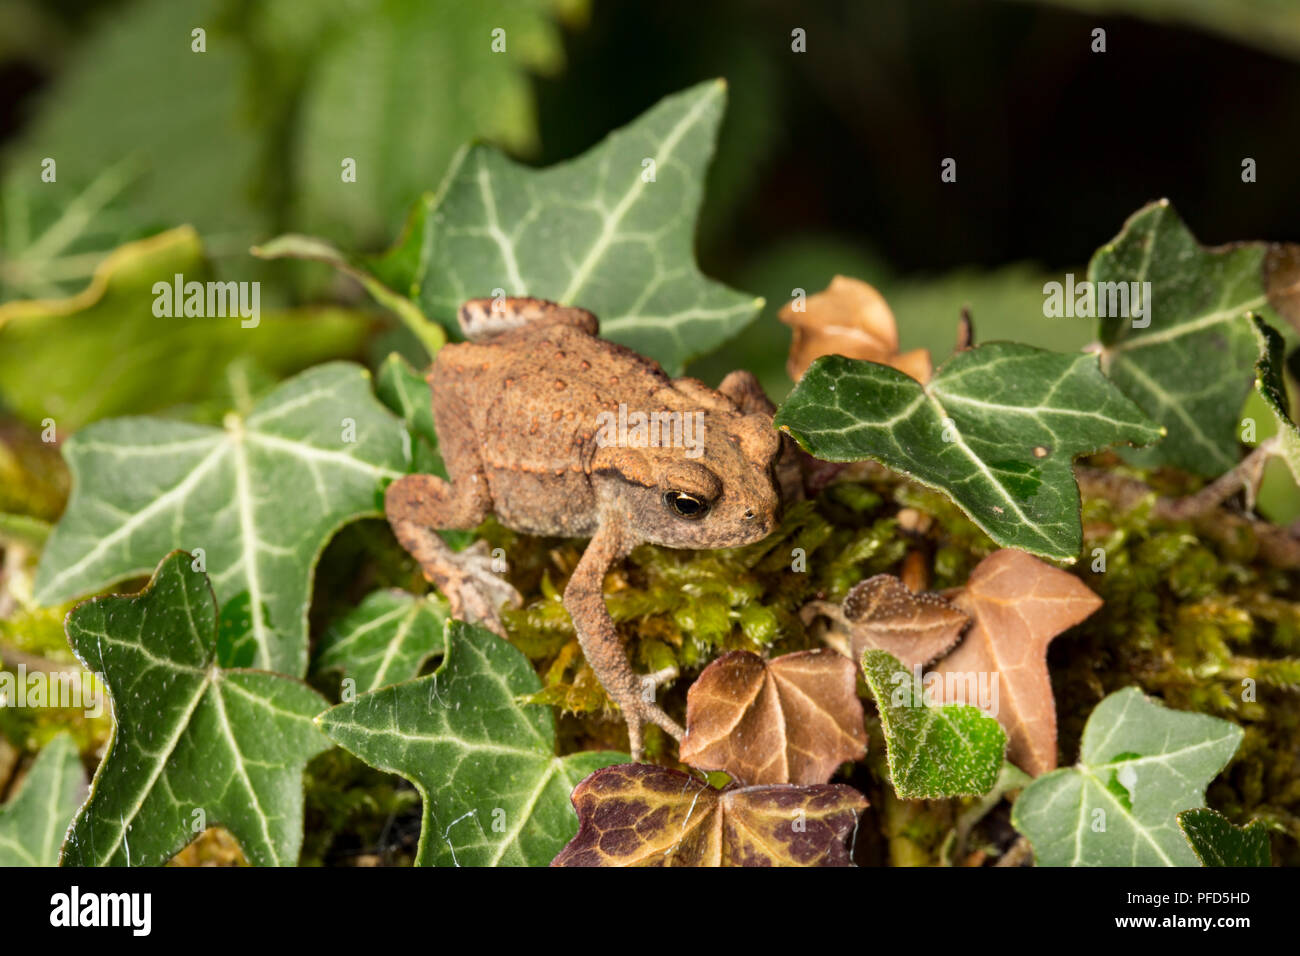 A young common or european toad, Bufo bufo, resting on ivy photographed at night in a garden in Lancashire North West England UK GB Stock Photo